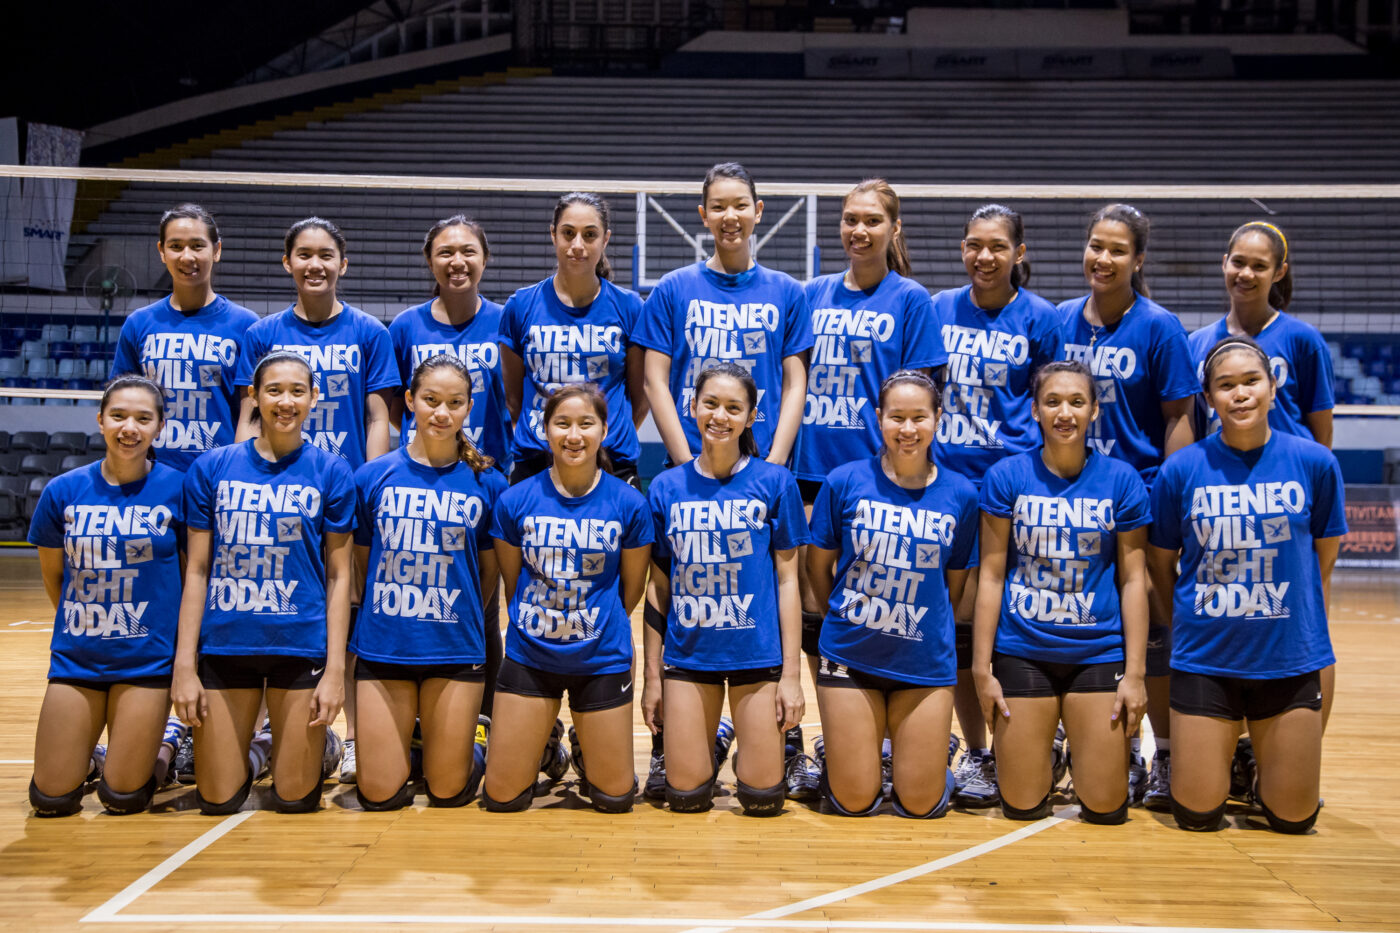 Dawn Of A New Era Ateneo Lady Spikers Set For Season 76